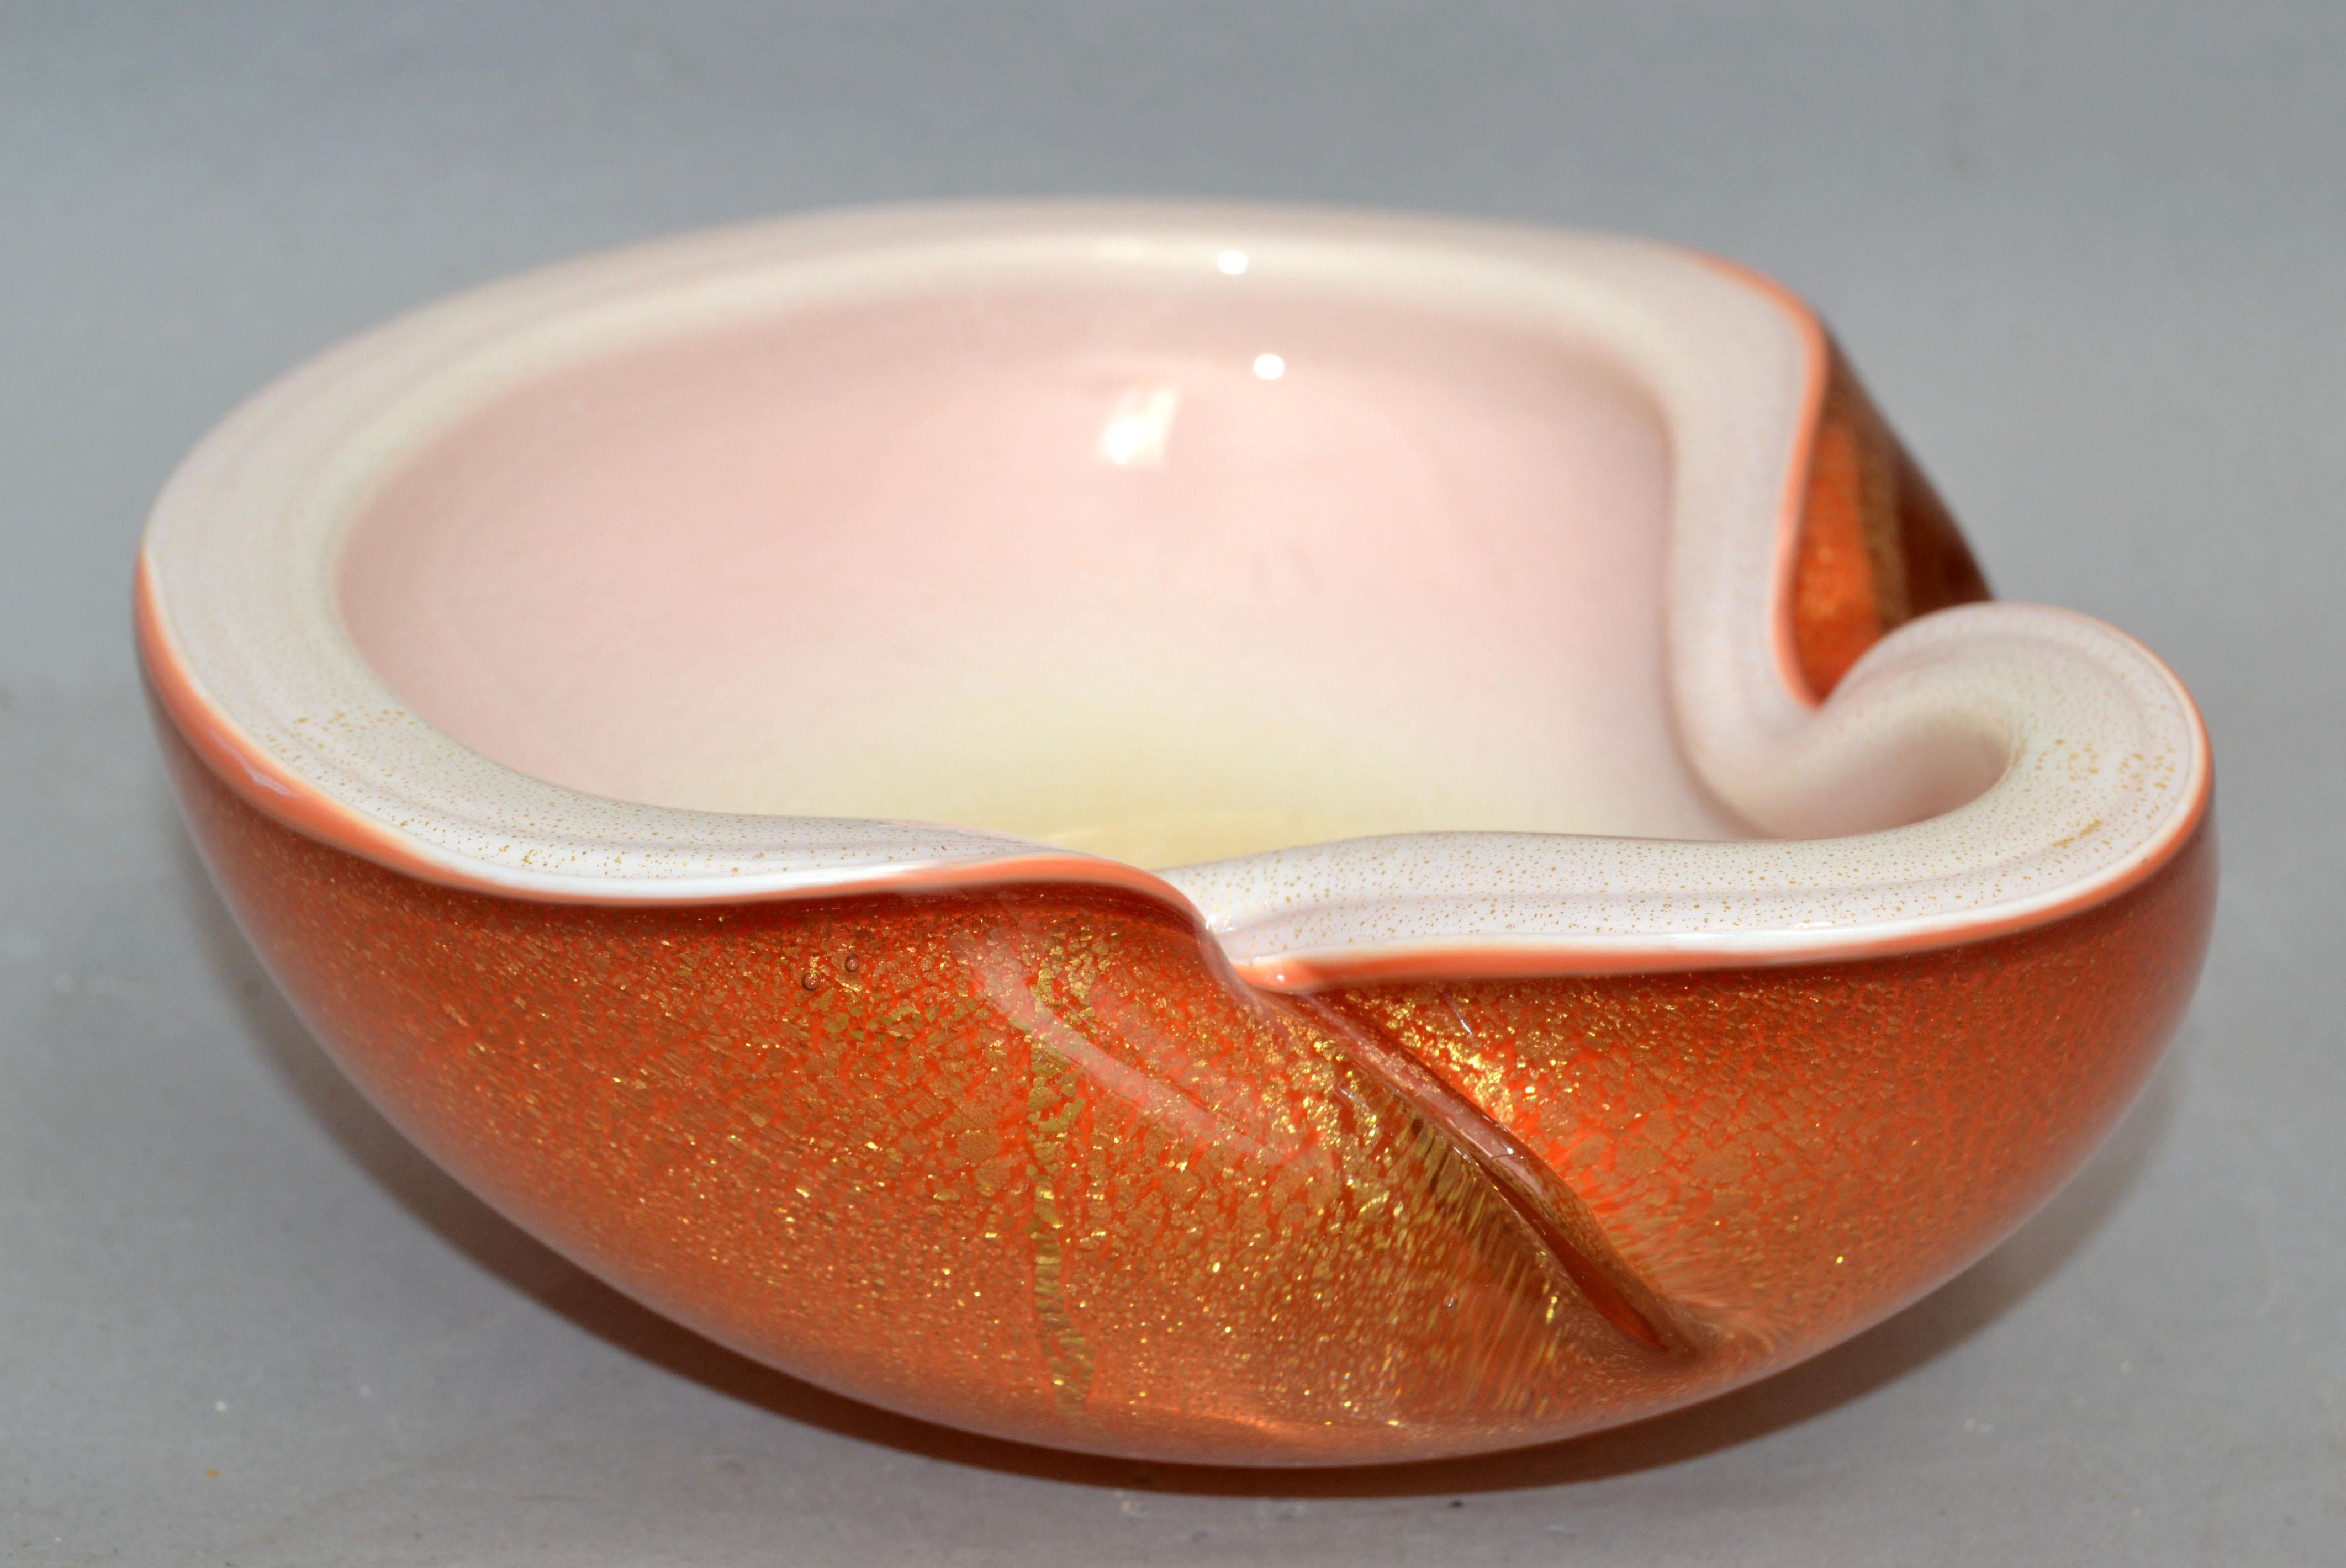 Murano Mid-Century Modern art glass triple cased bowl in gold dusted bronze, White & Clear blown glass catchall, made in Italy circa 1960.
Bol en verre lourd avec des détails remarquables.